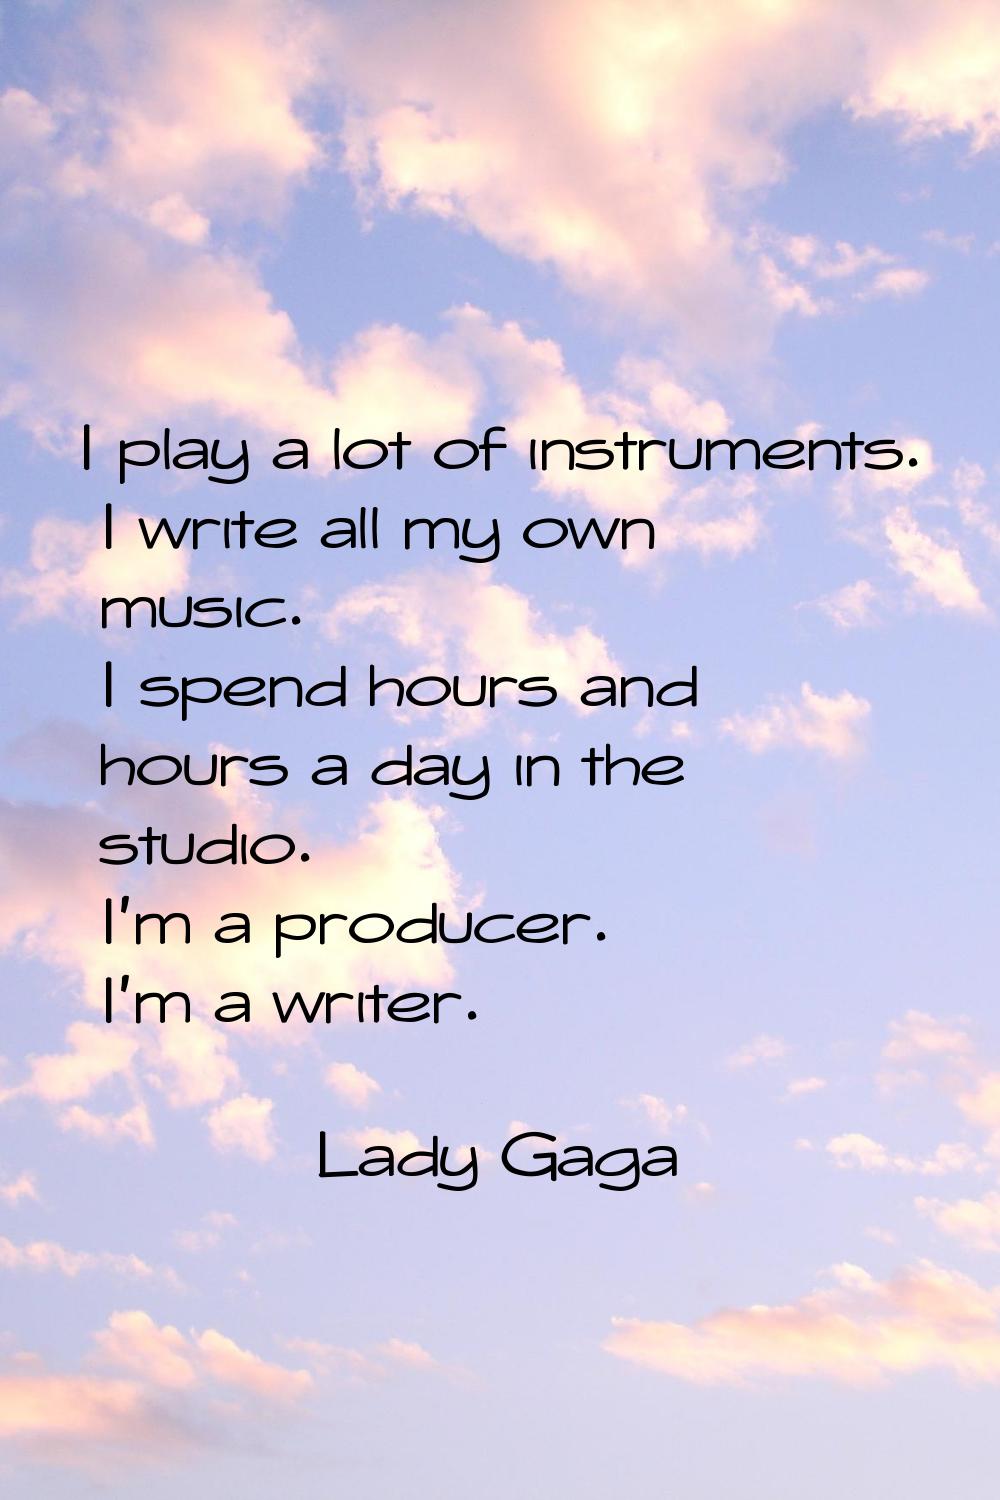 I play a lot of instruments. I write all my own music. I spend hours and hours a day in the studio.